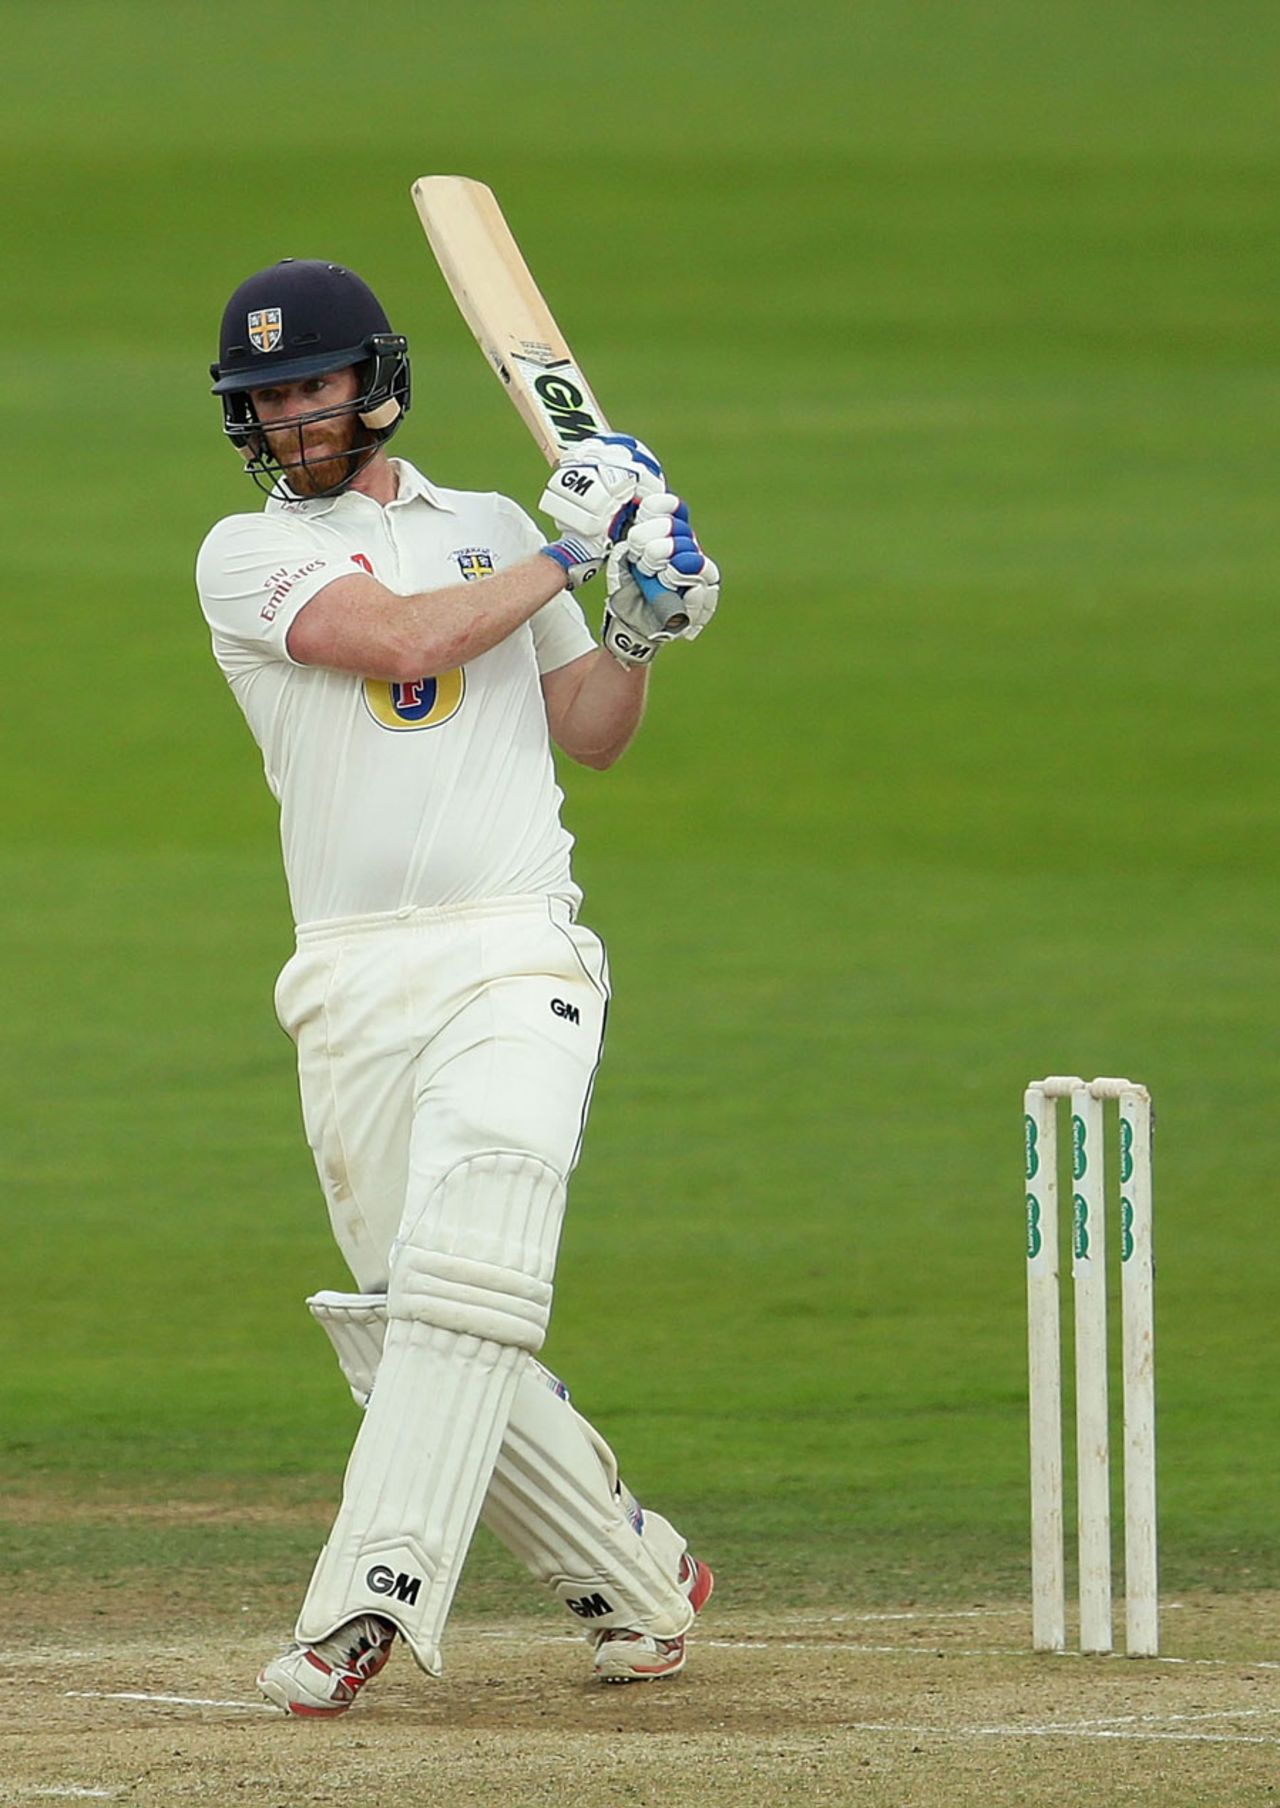 Graham Clark made 25 before being seventh out, Yorkshire v Durham, County Championship, Division One, Headingley, 4th day, September 8, 2016